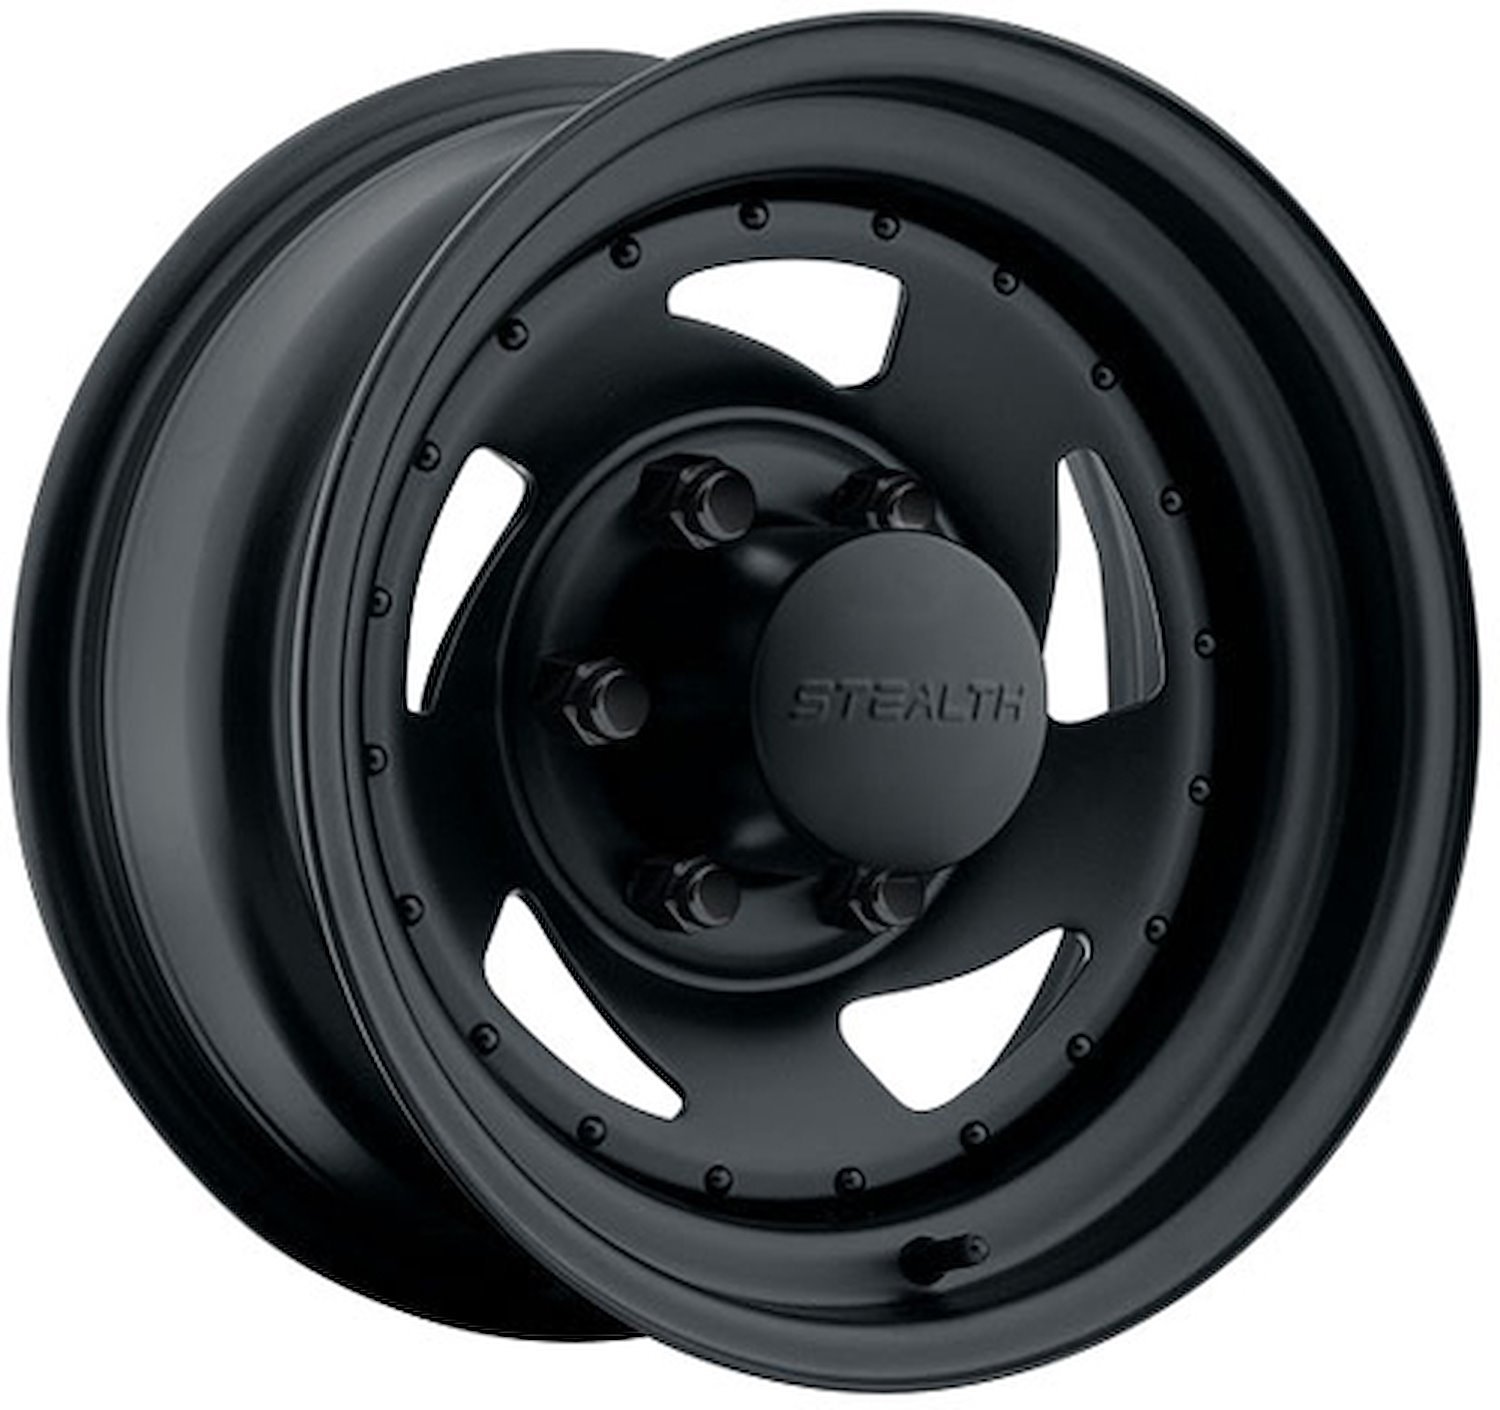 STEALTH BLACK BLADE 15 x 8 6 x 55 Bolt Circle 475 Back Spacing +6 offset 428 Center Bore 1500 lbs Load Rating